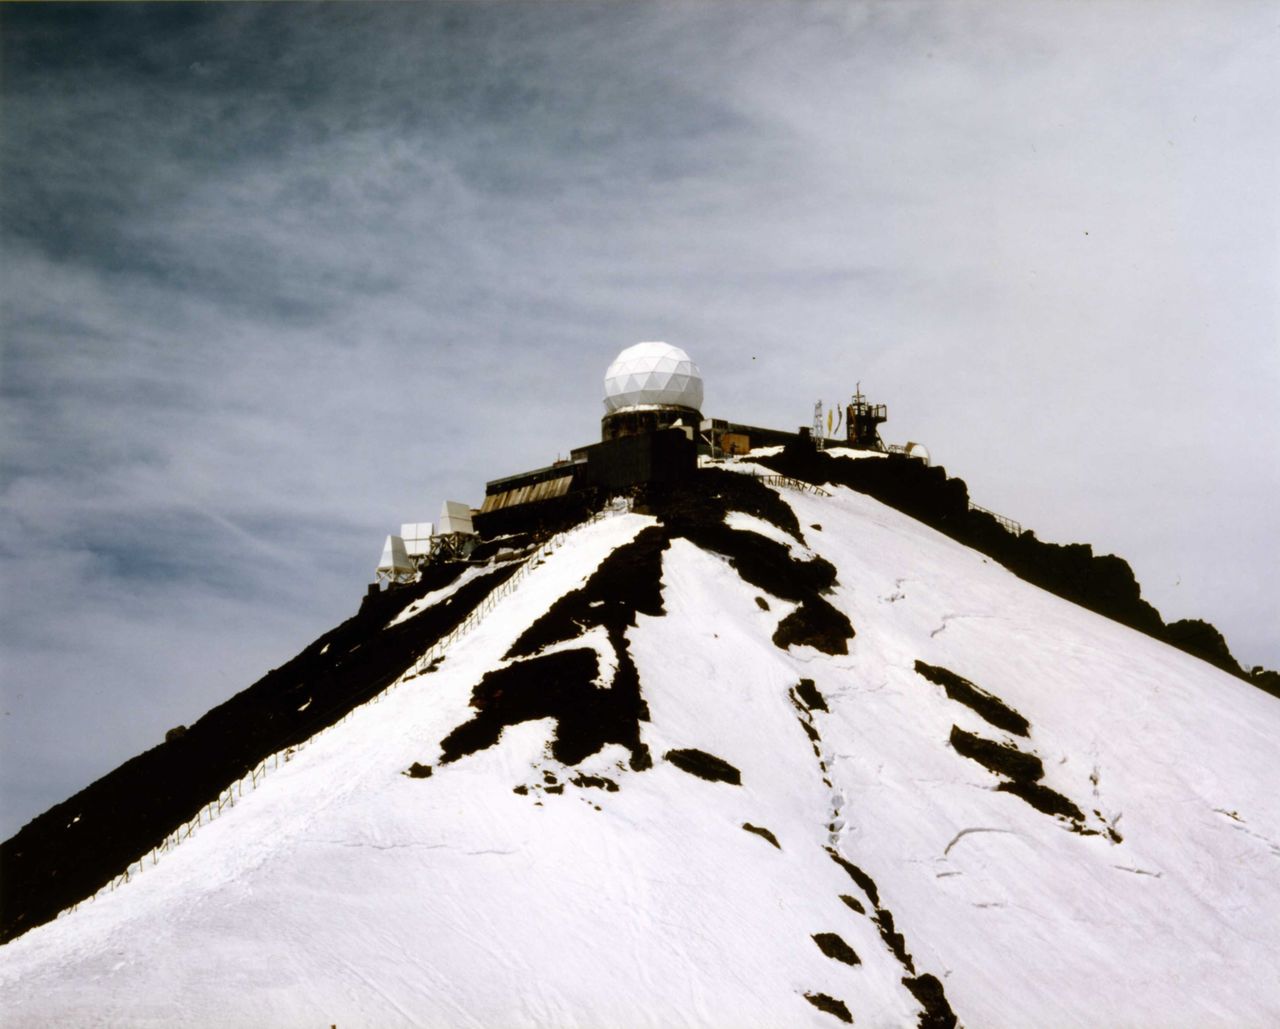 The radar dome before it was removed in 2001. The structure can be seen today at the Mount Fuji Radar Dome Museum in Fujiyoshida, Yamanashi Prefecture. (Photo by Iwazaki Hiroshi, MFRS summit team leader)